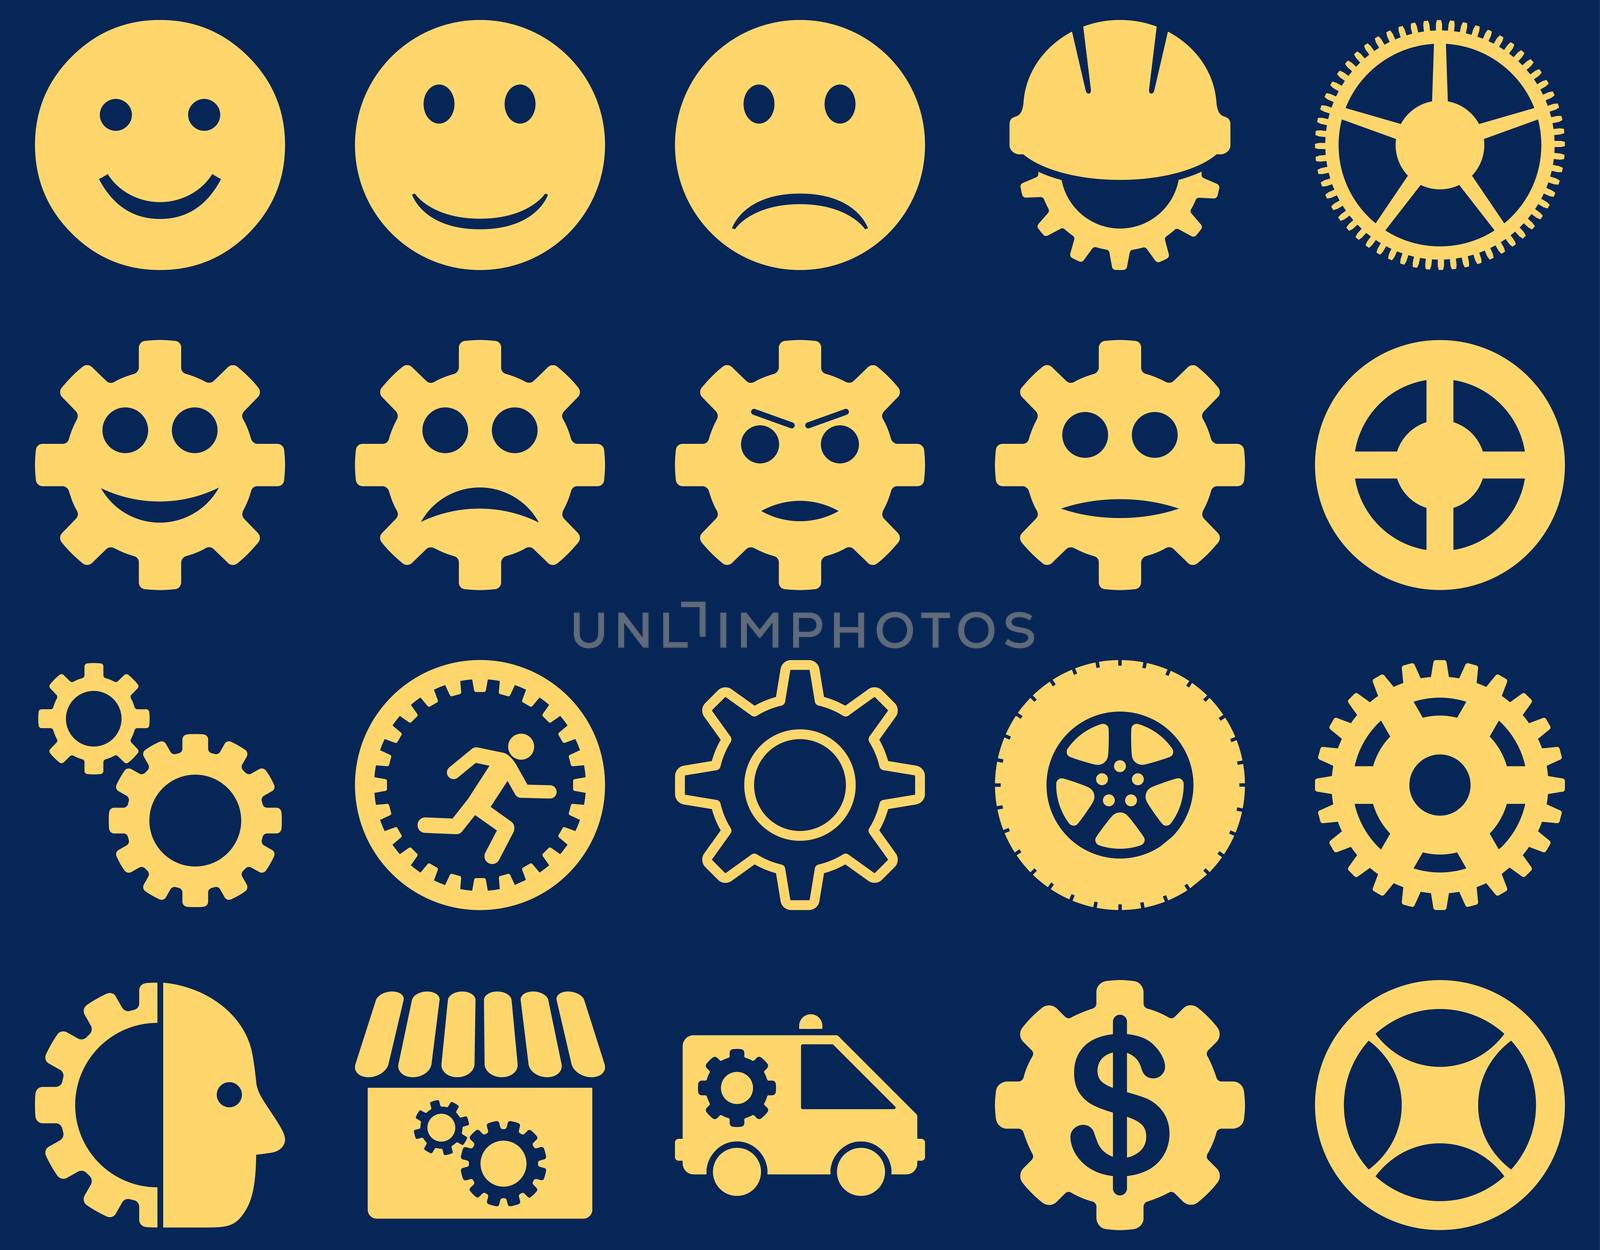 Tools and Smile Gears Icons. Glyph set style is flat images, yellow color, isolated on a blue background.